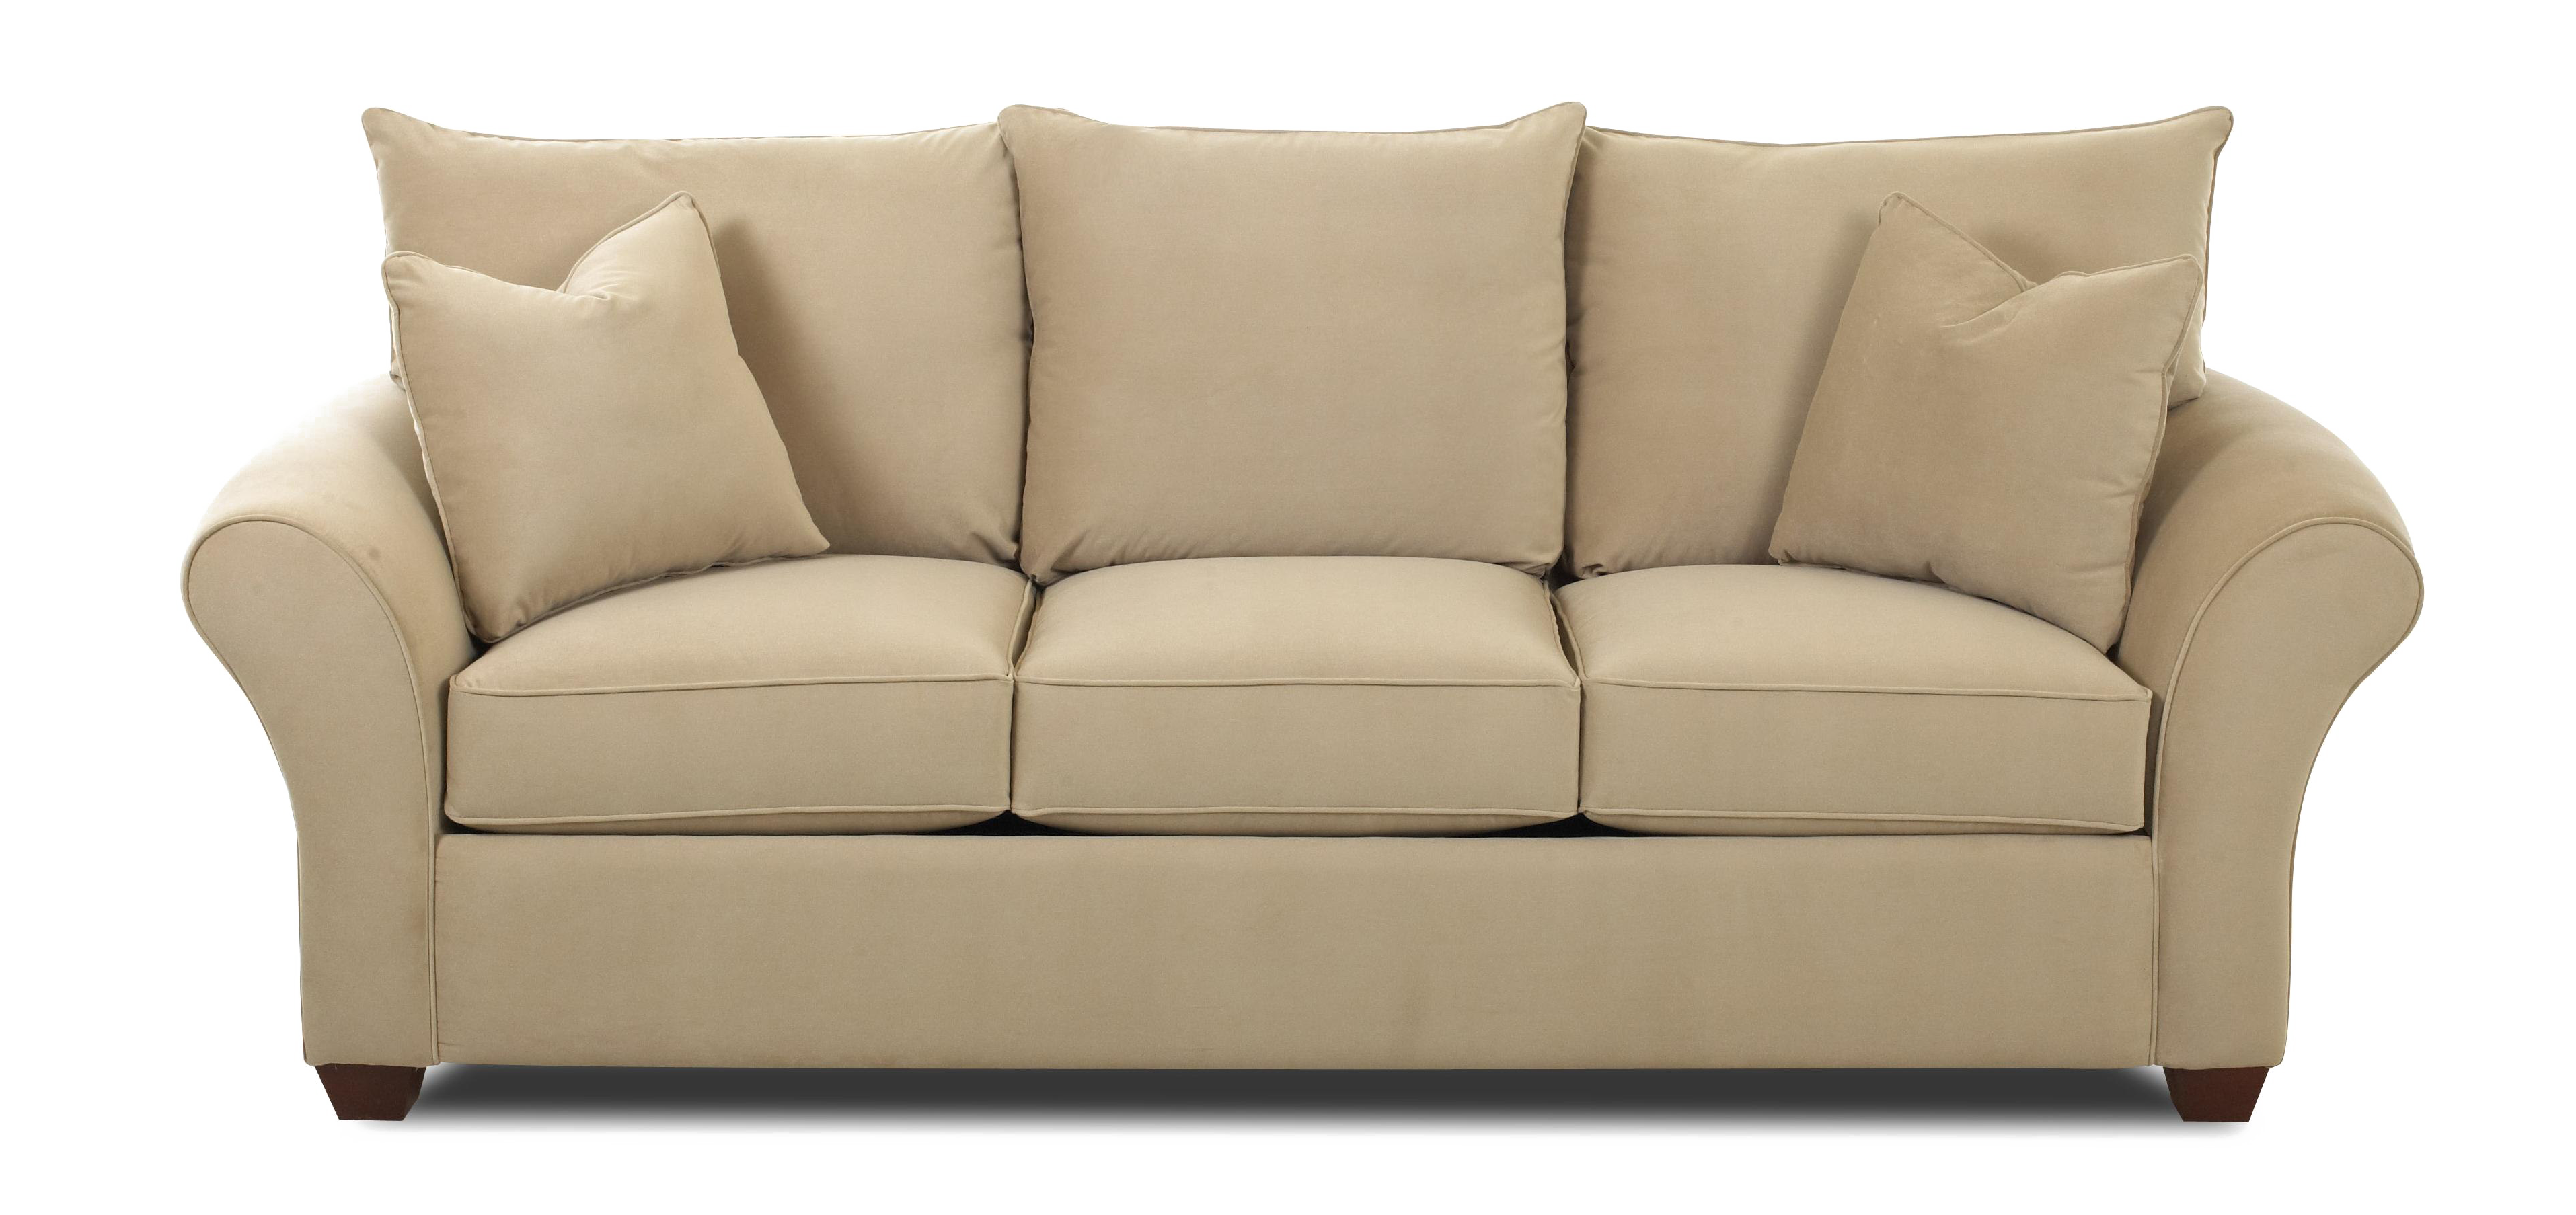 Couch and Sofa PNG Photo pngteam.com